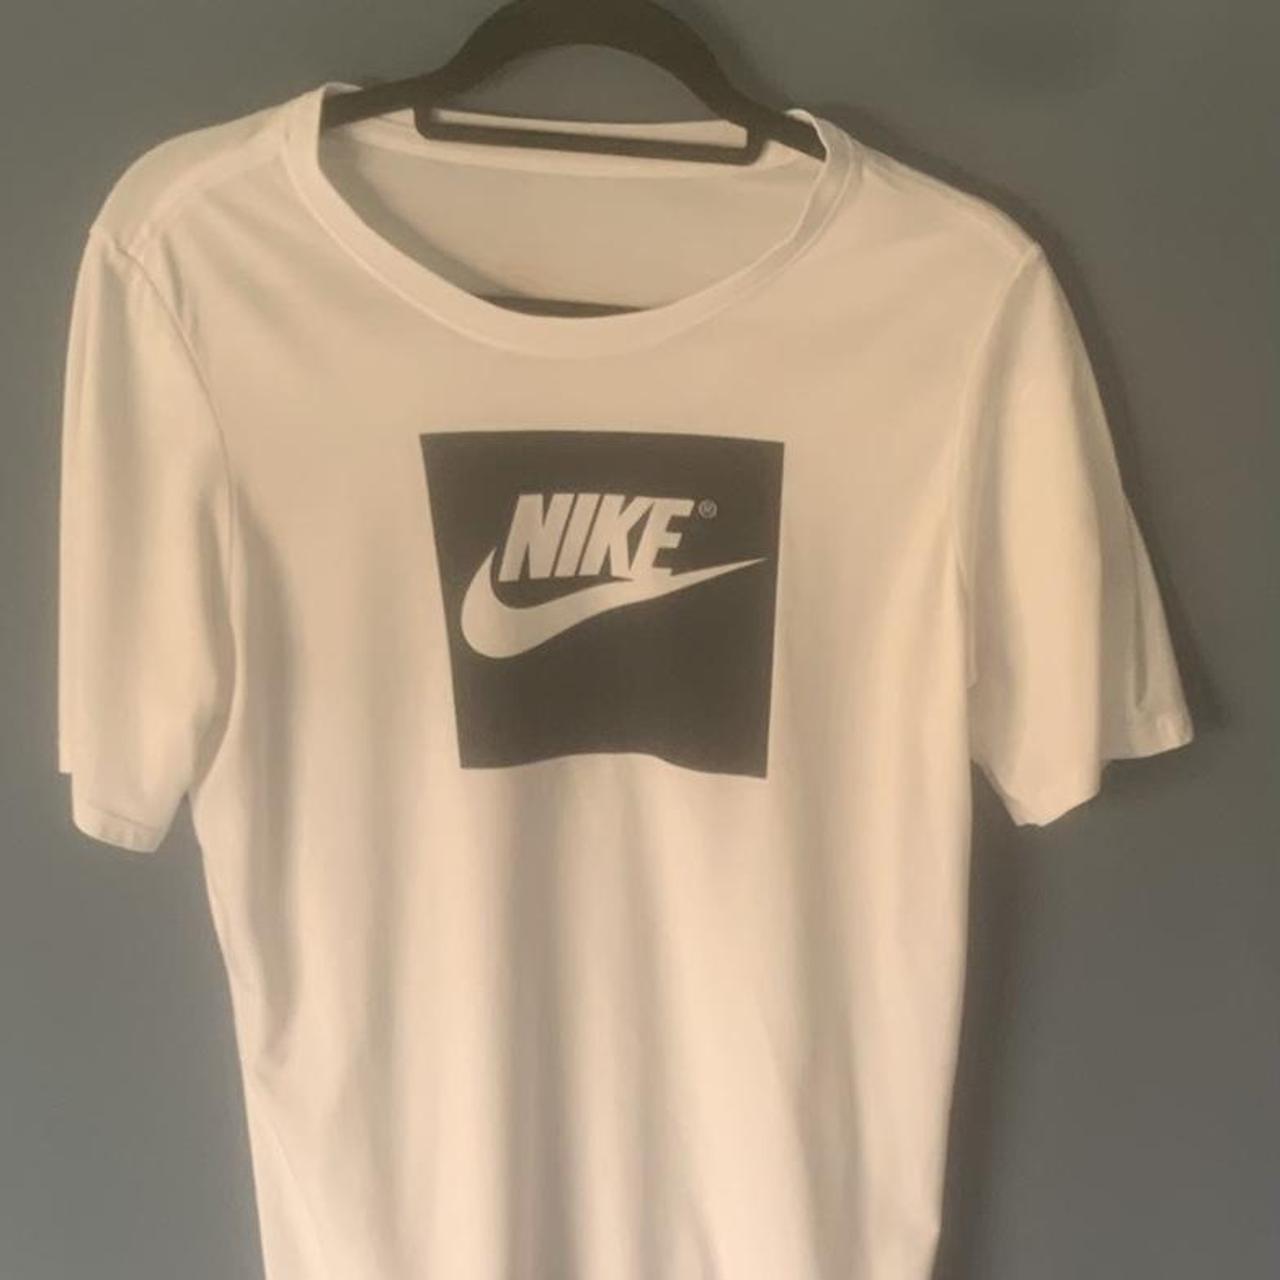 Small mens white nike T shirt. Hardly been worn, no... - Depop